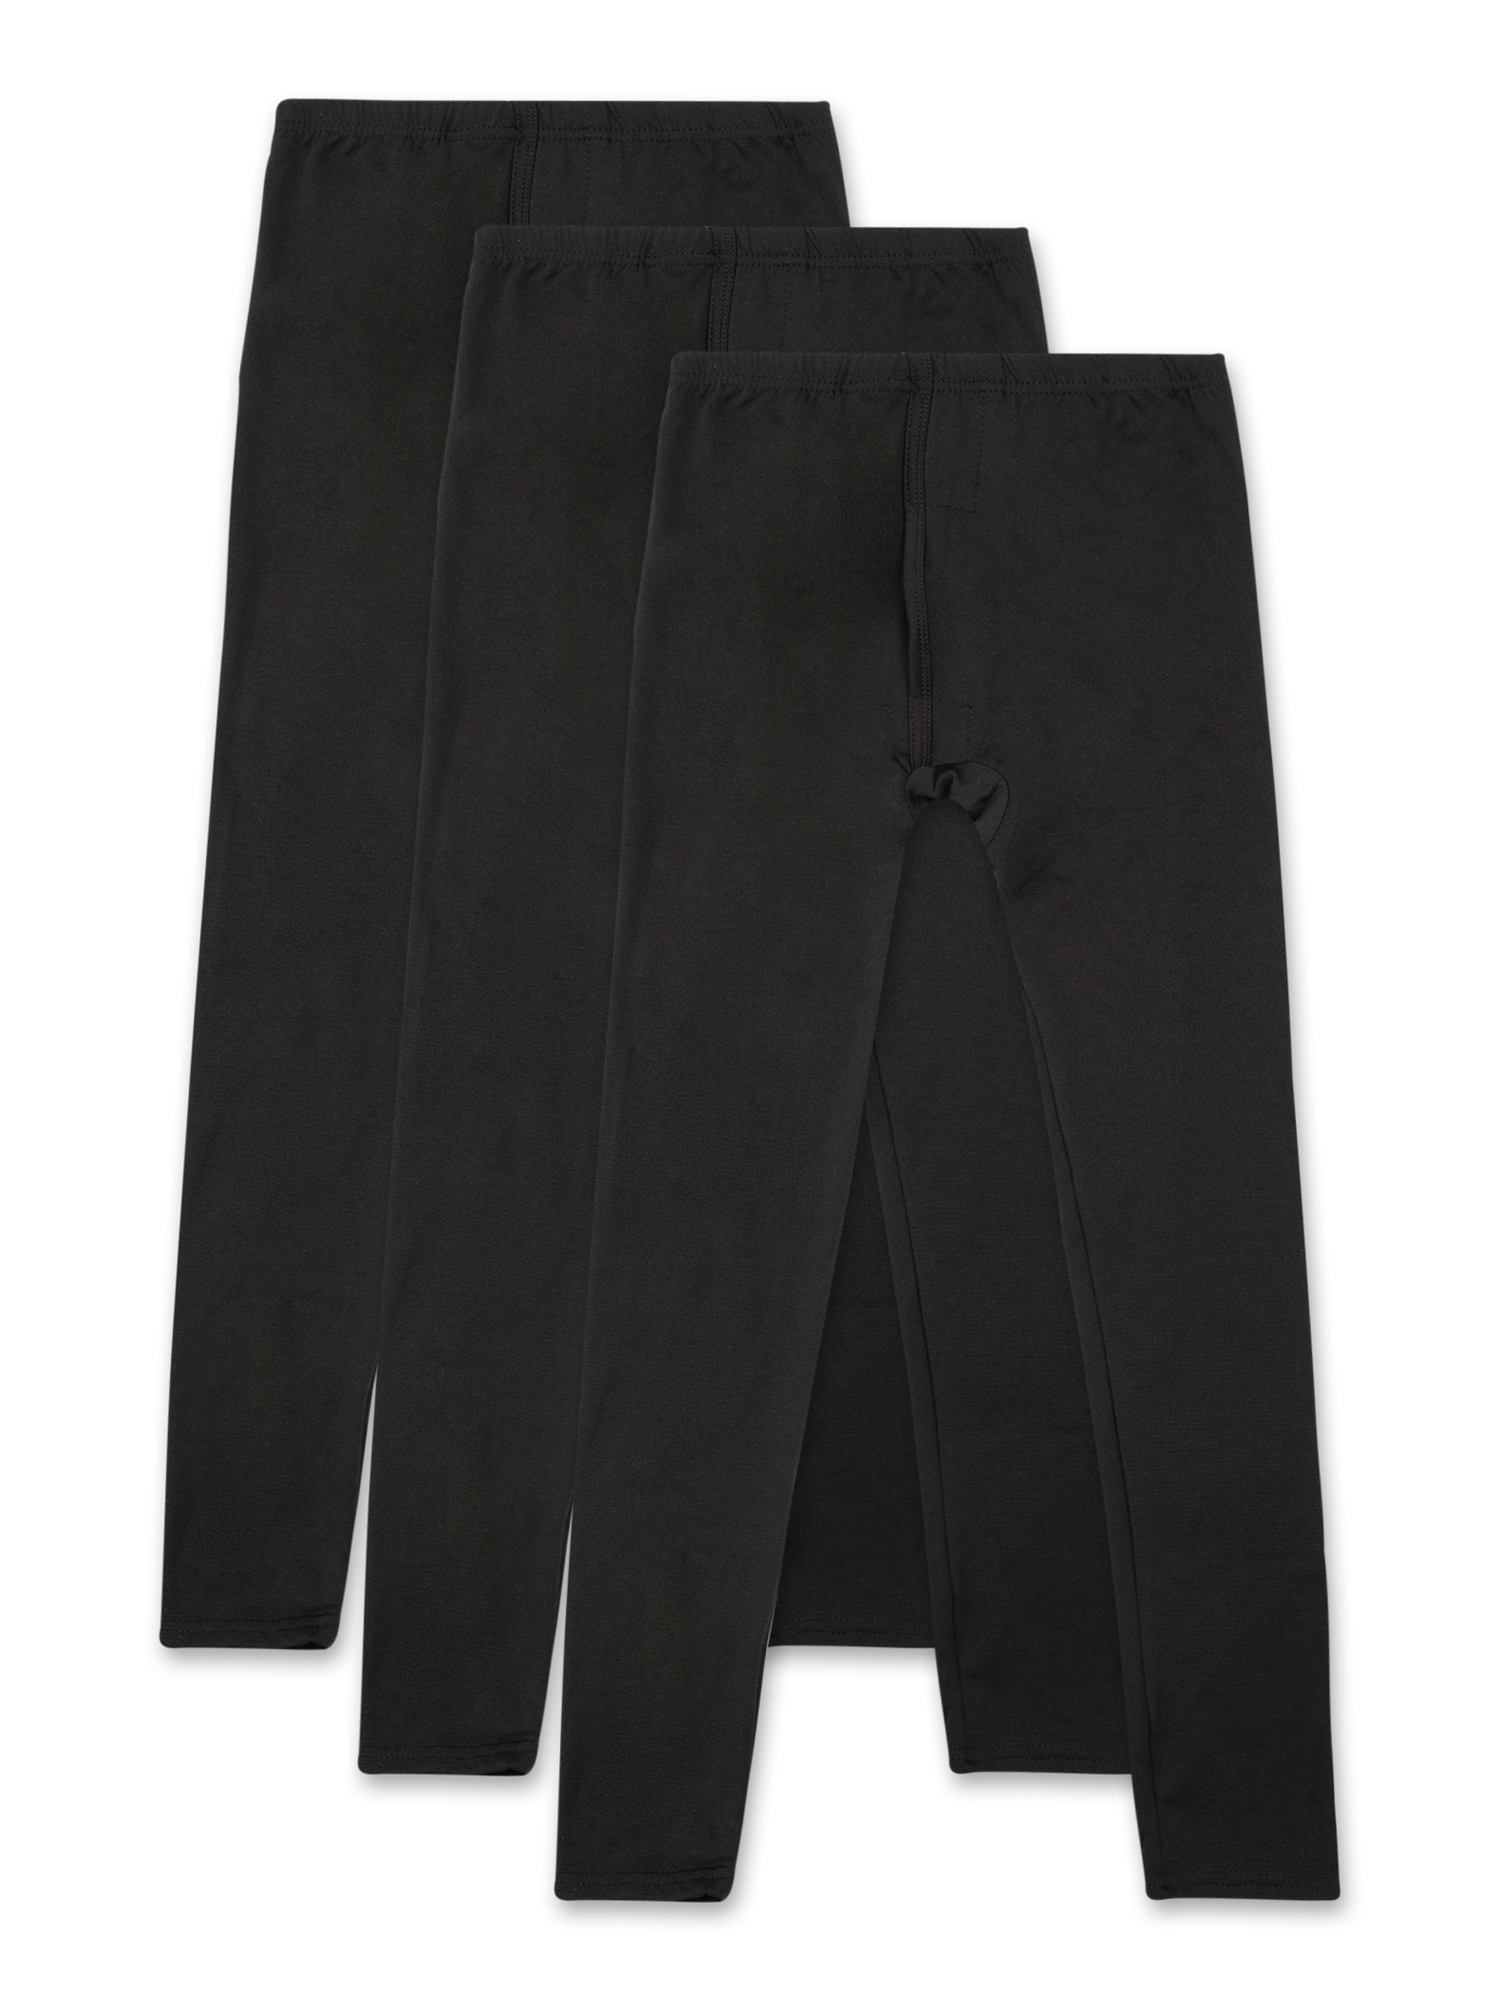 Real Essentials Boys Thermal Bottoms, 3 Pack Fleece Lined Thermal Pants Sizes S (6-7) - XL (16-18) - image 1 of 5